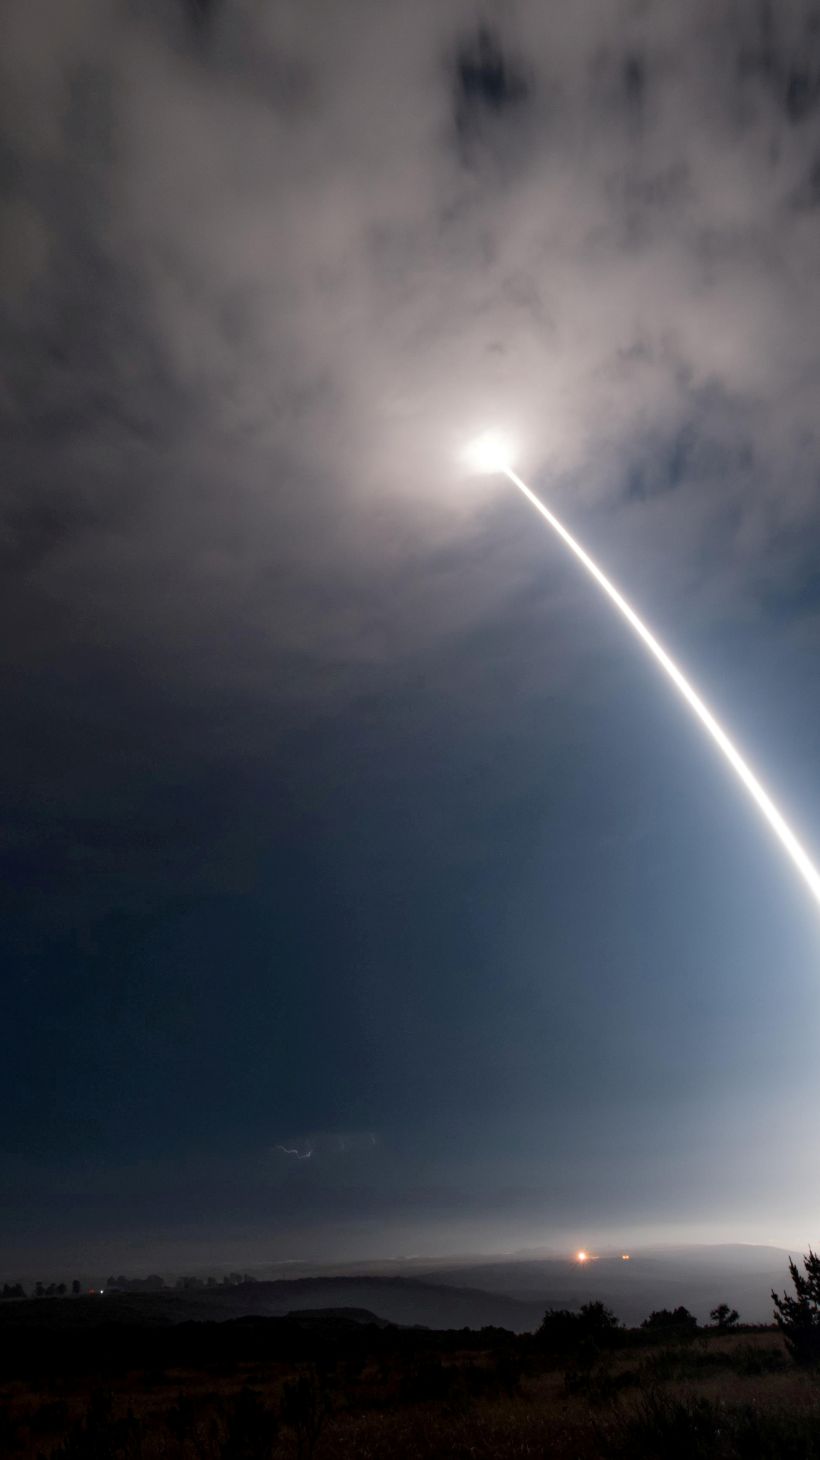 An unarmed Minuteman III intercontinental ballistic missile launches during an operational test at 2:10 a.m. Pacific Daylight Time at Vandenberg Air Force Base, California, U.S., August 2, 2017. Picture taken August 2, 2017. To Match Special Report USA-NUCLEAR/ICBM U.S. Air Force/Senior Airman Ian Dudley/Handout via REUTERS ATTENTION EDITORS - THIS IMAGE WAS PROVIDED BY A THIRD PARTY